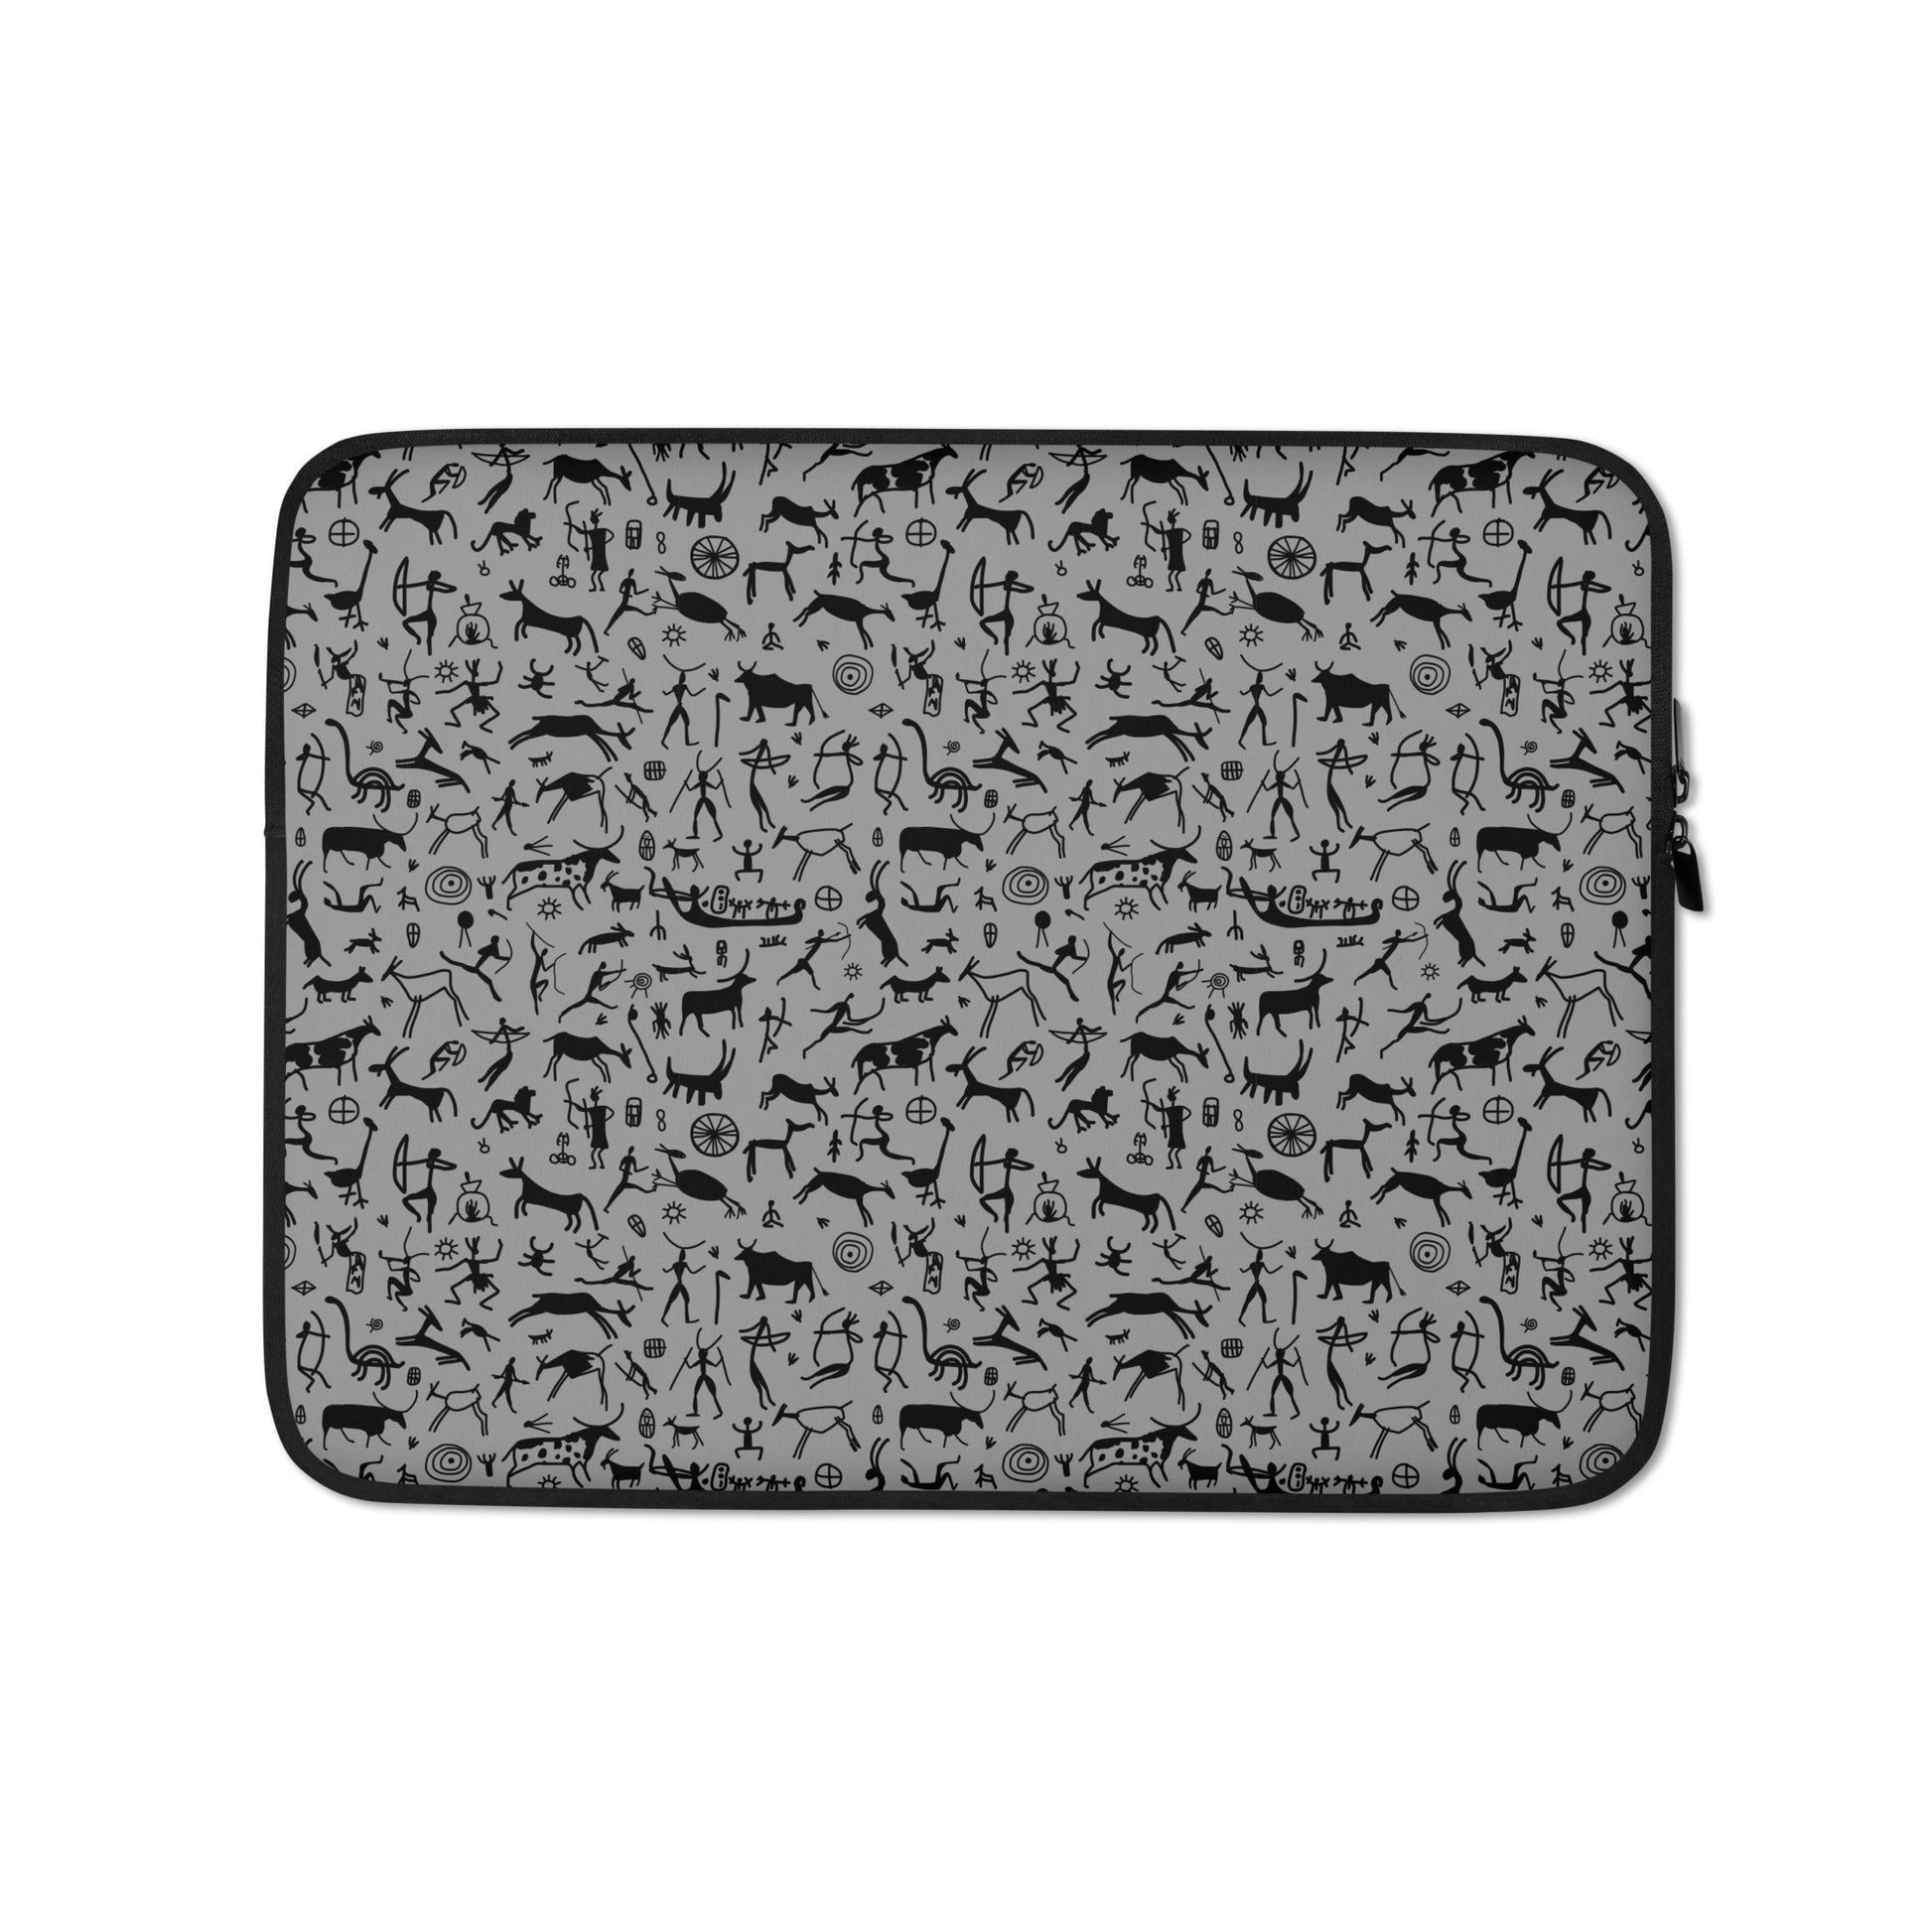 Stylish Laptop Sleeve / Cover dark grey color with ethnic designer print - black cave drawings for archeology and history lover